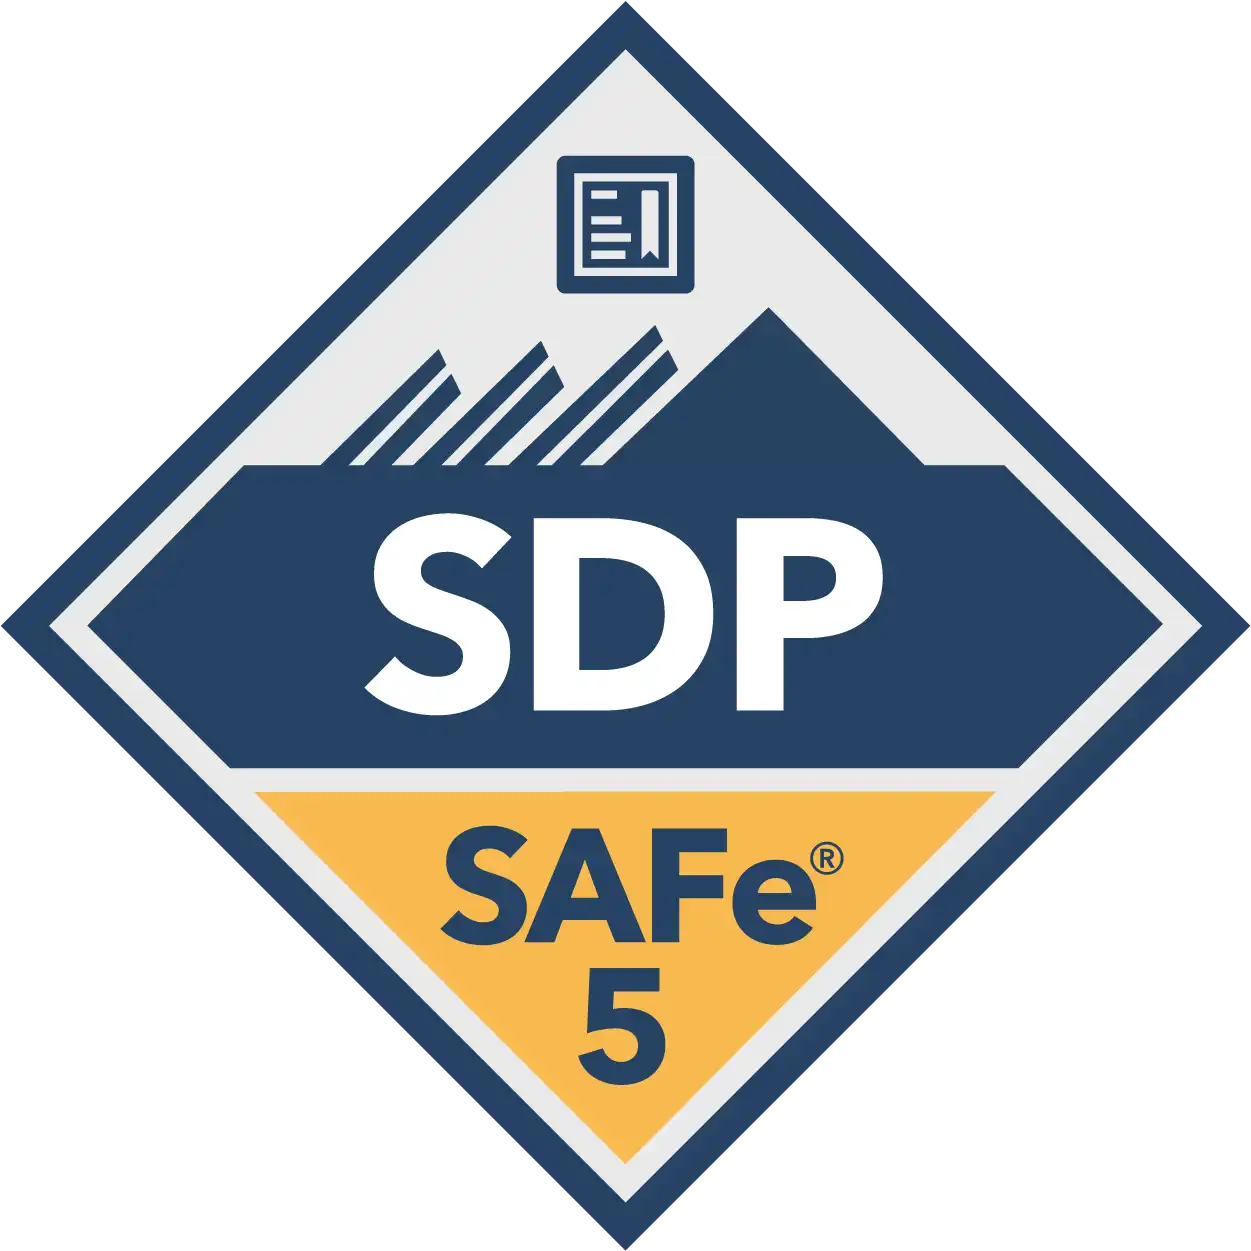 Certified SAFe® 5 DevOps Practitioner,A Certified SAFe® 5 DevOps Practitioner (SDP) is a SAFe professional responsible for improving the complete flow of value through a Continuous Delivery Pipeline from idea to operational solution. Key areas of responsibility include participating in Continuous Exploration, Continuous Integration, Continuous Deployment, Release-on-Demand, continuous testing, continuous security, and building a culture of shared responsibility.